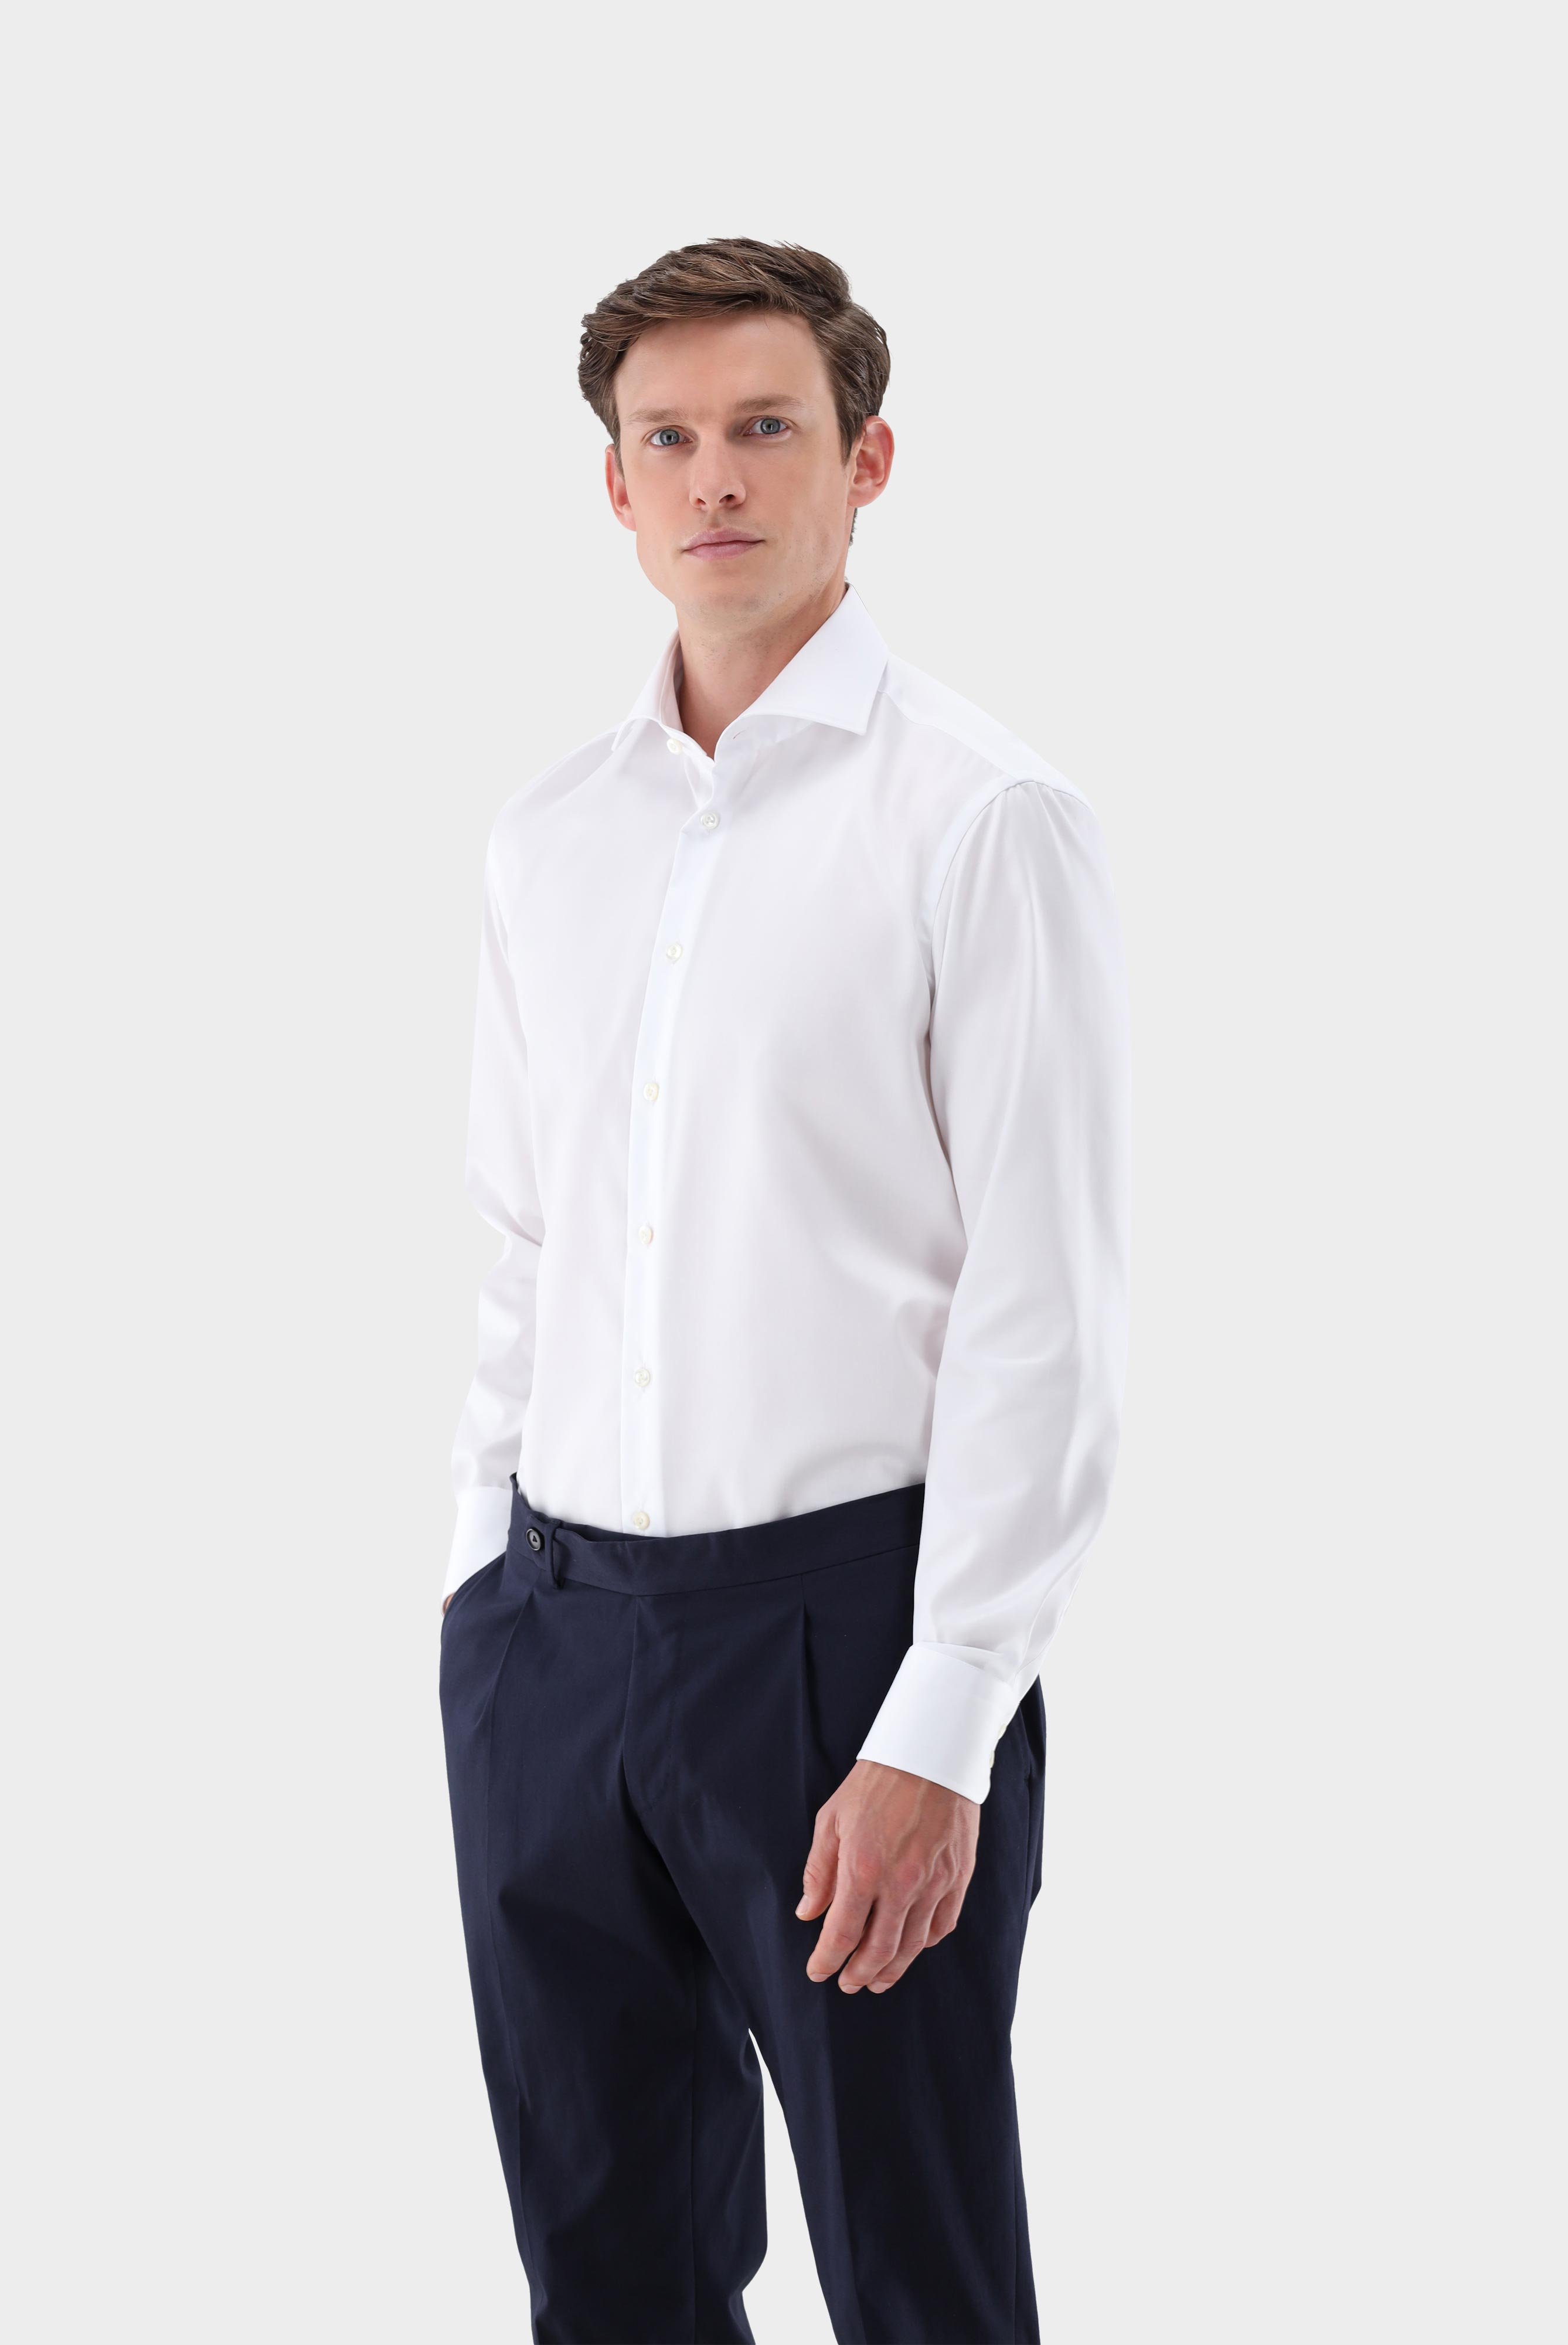 Easy Iron Shirts+Wrinkle Free Twill Shirt Tailor Fit+35.3012.BN.133342.000.38